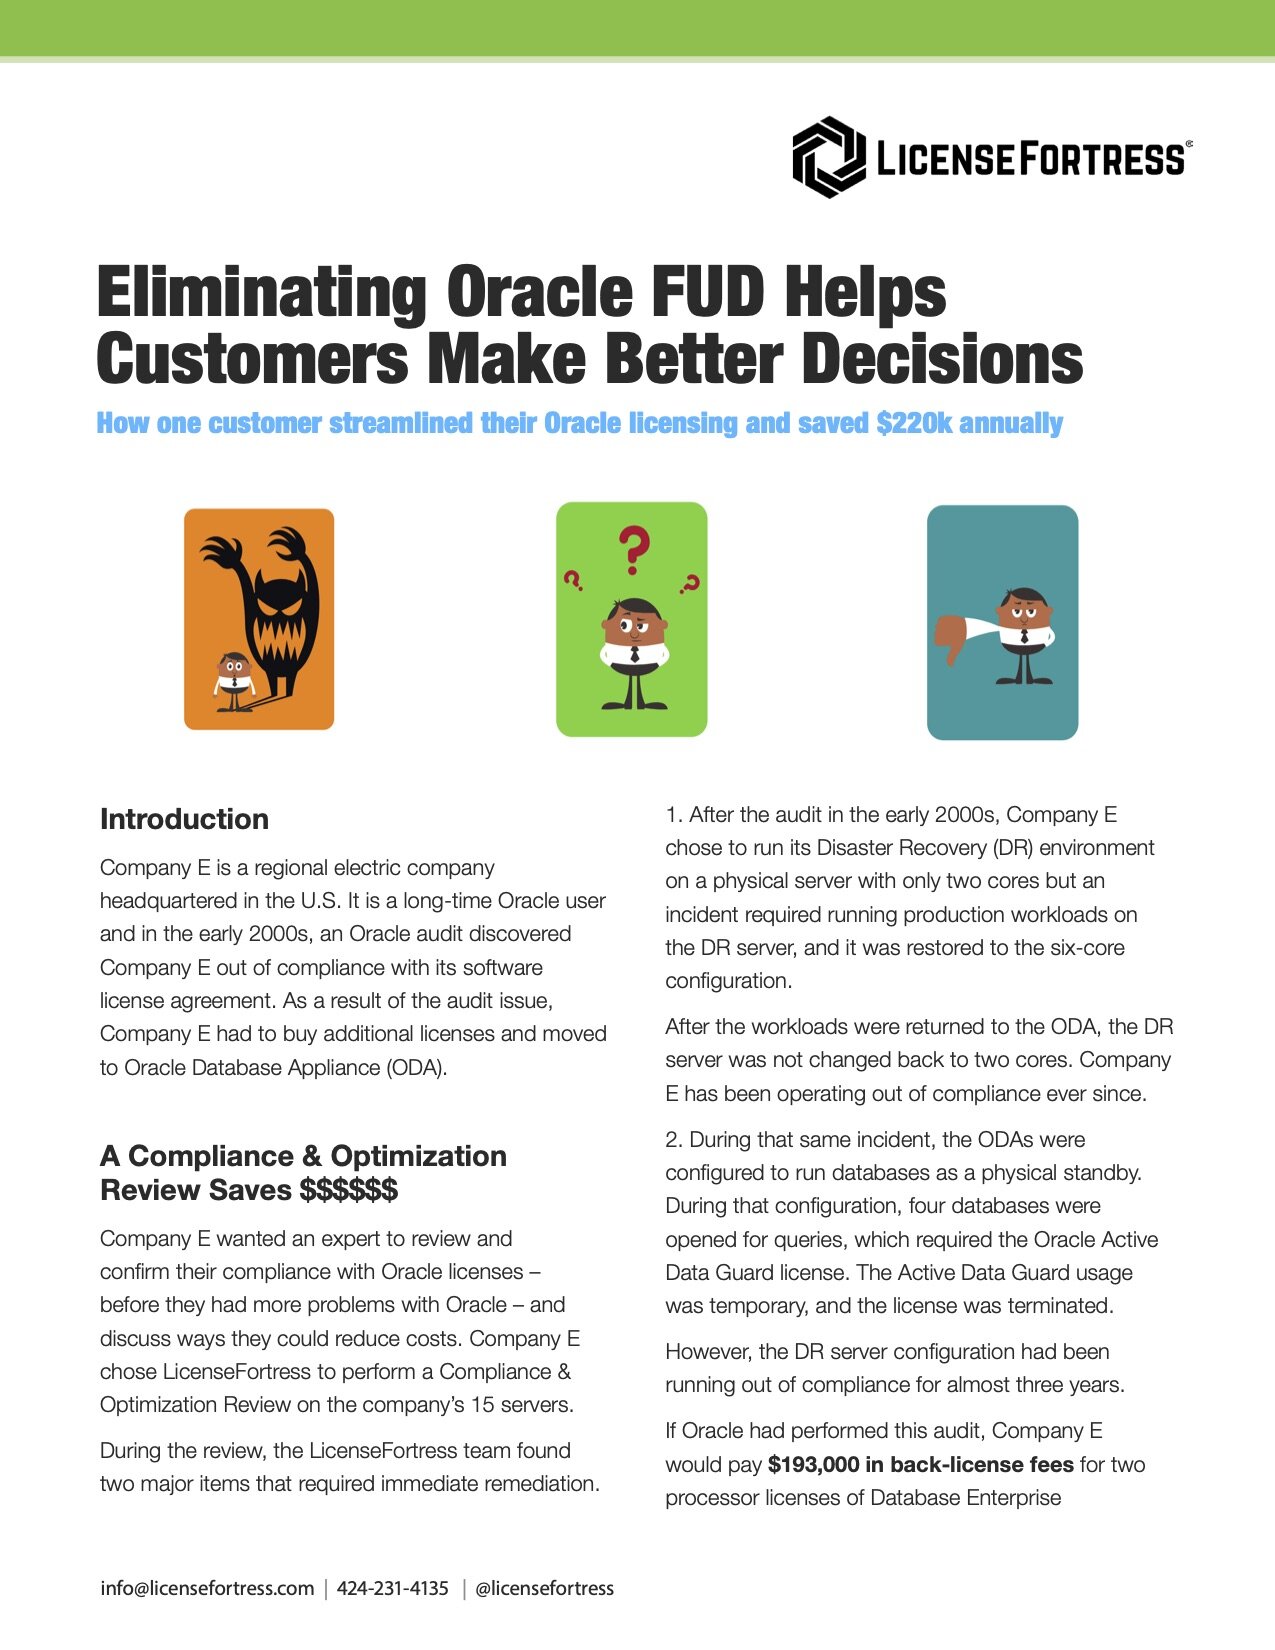 Eliminating Oracle FUD Helps Customers Make Better Decisions